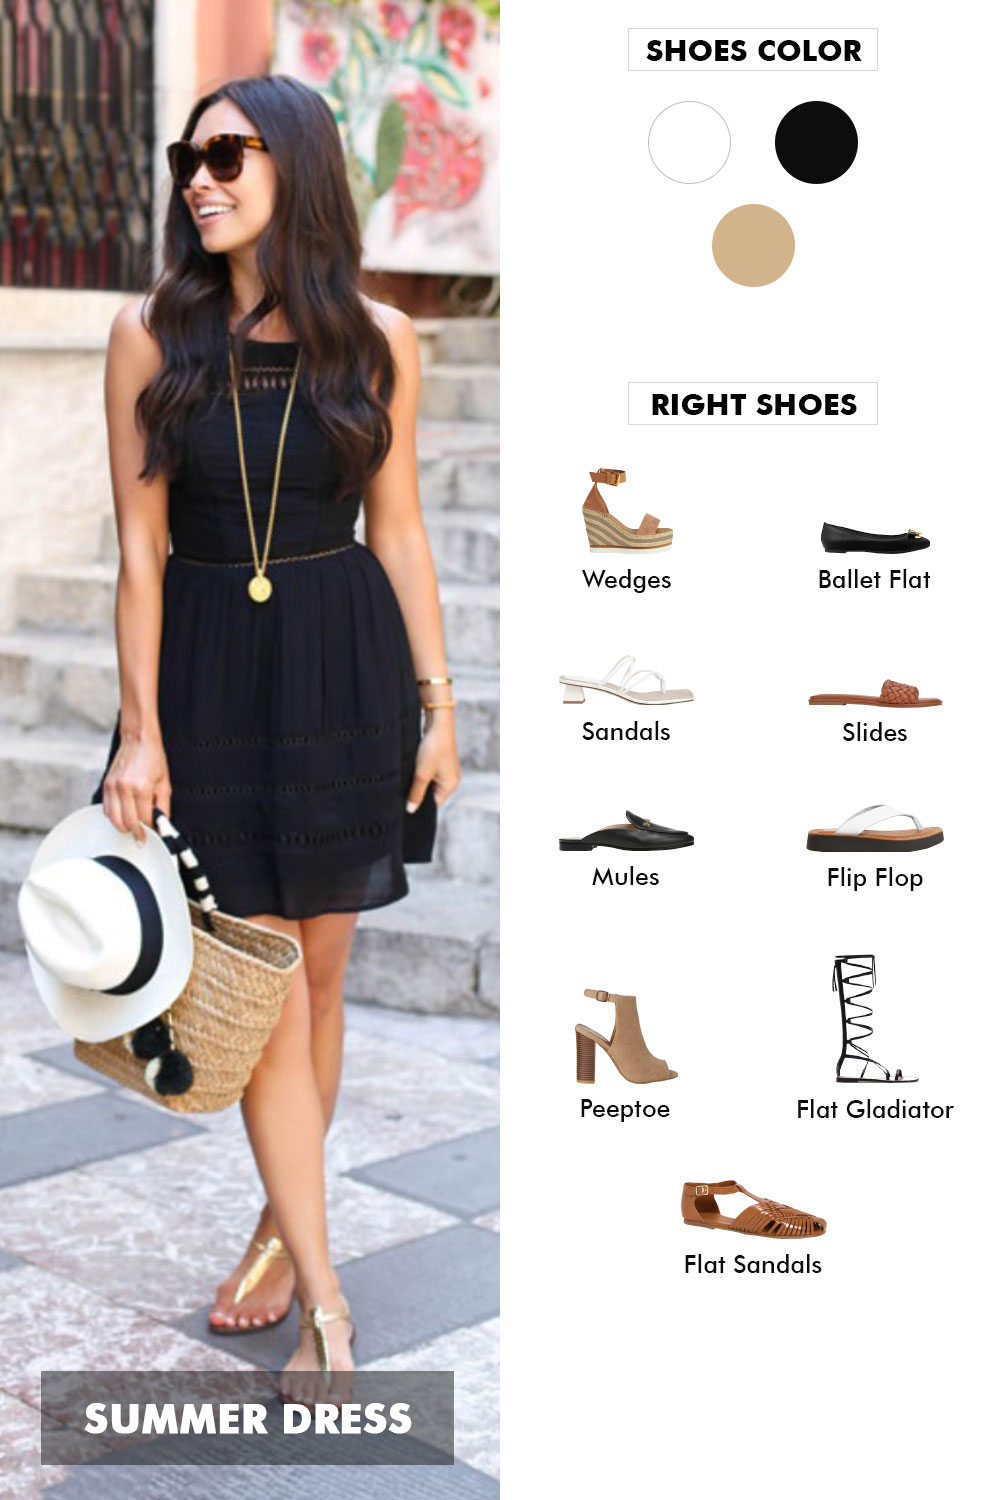 tan shoes with black dress